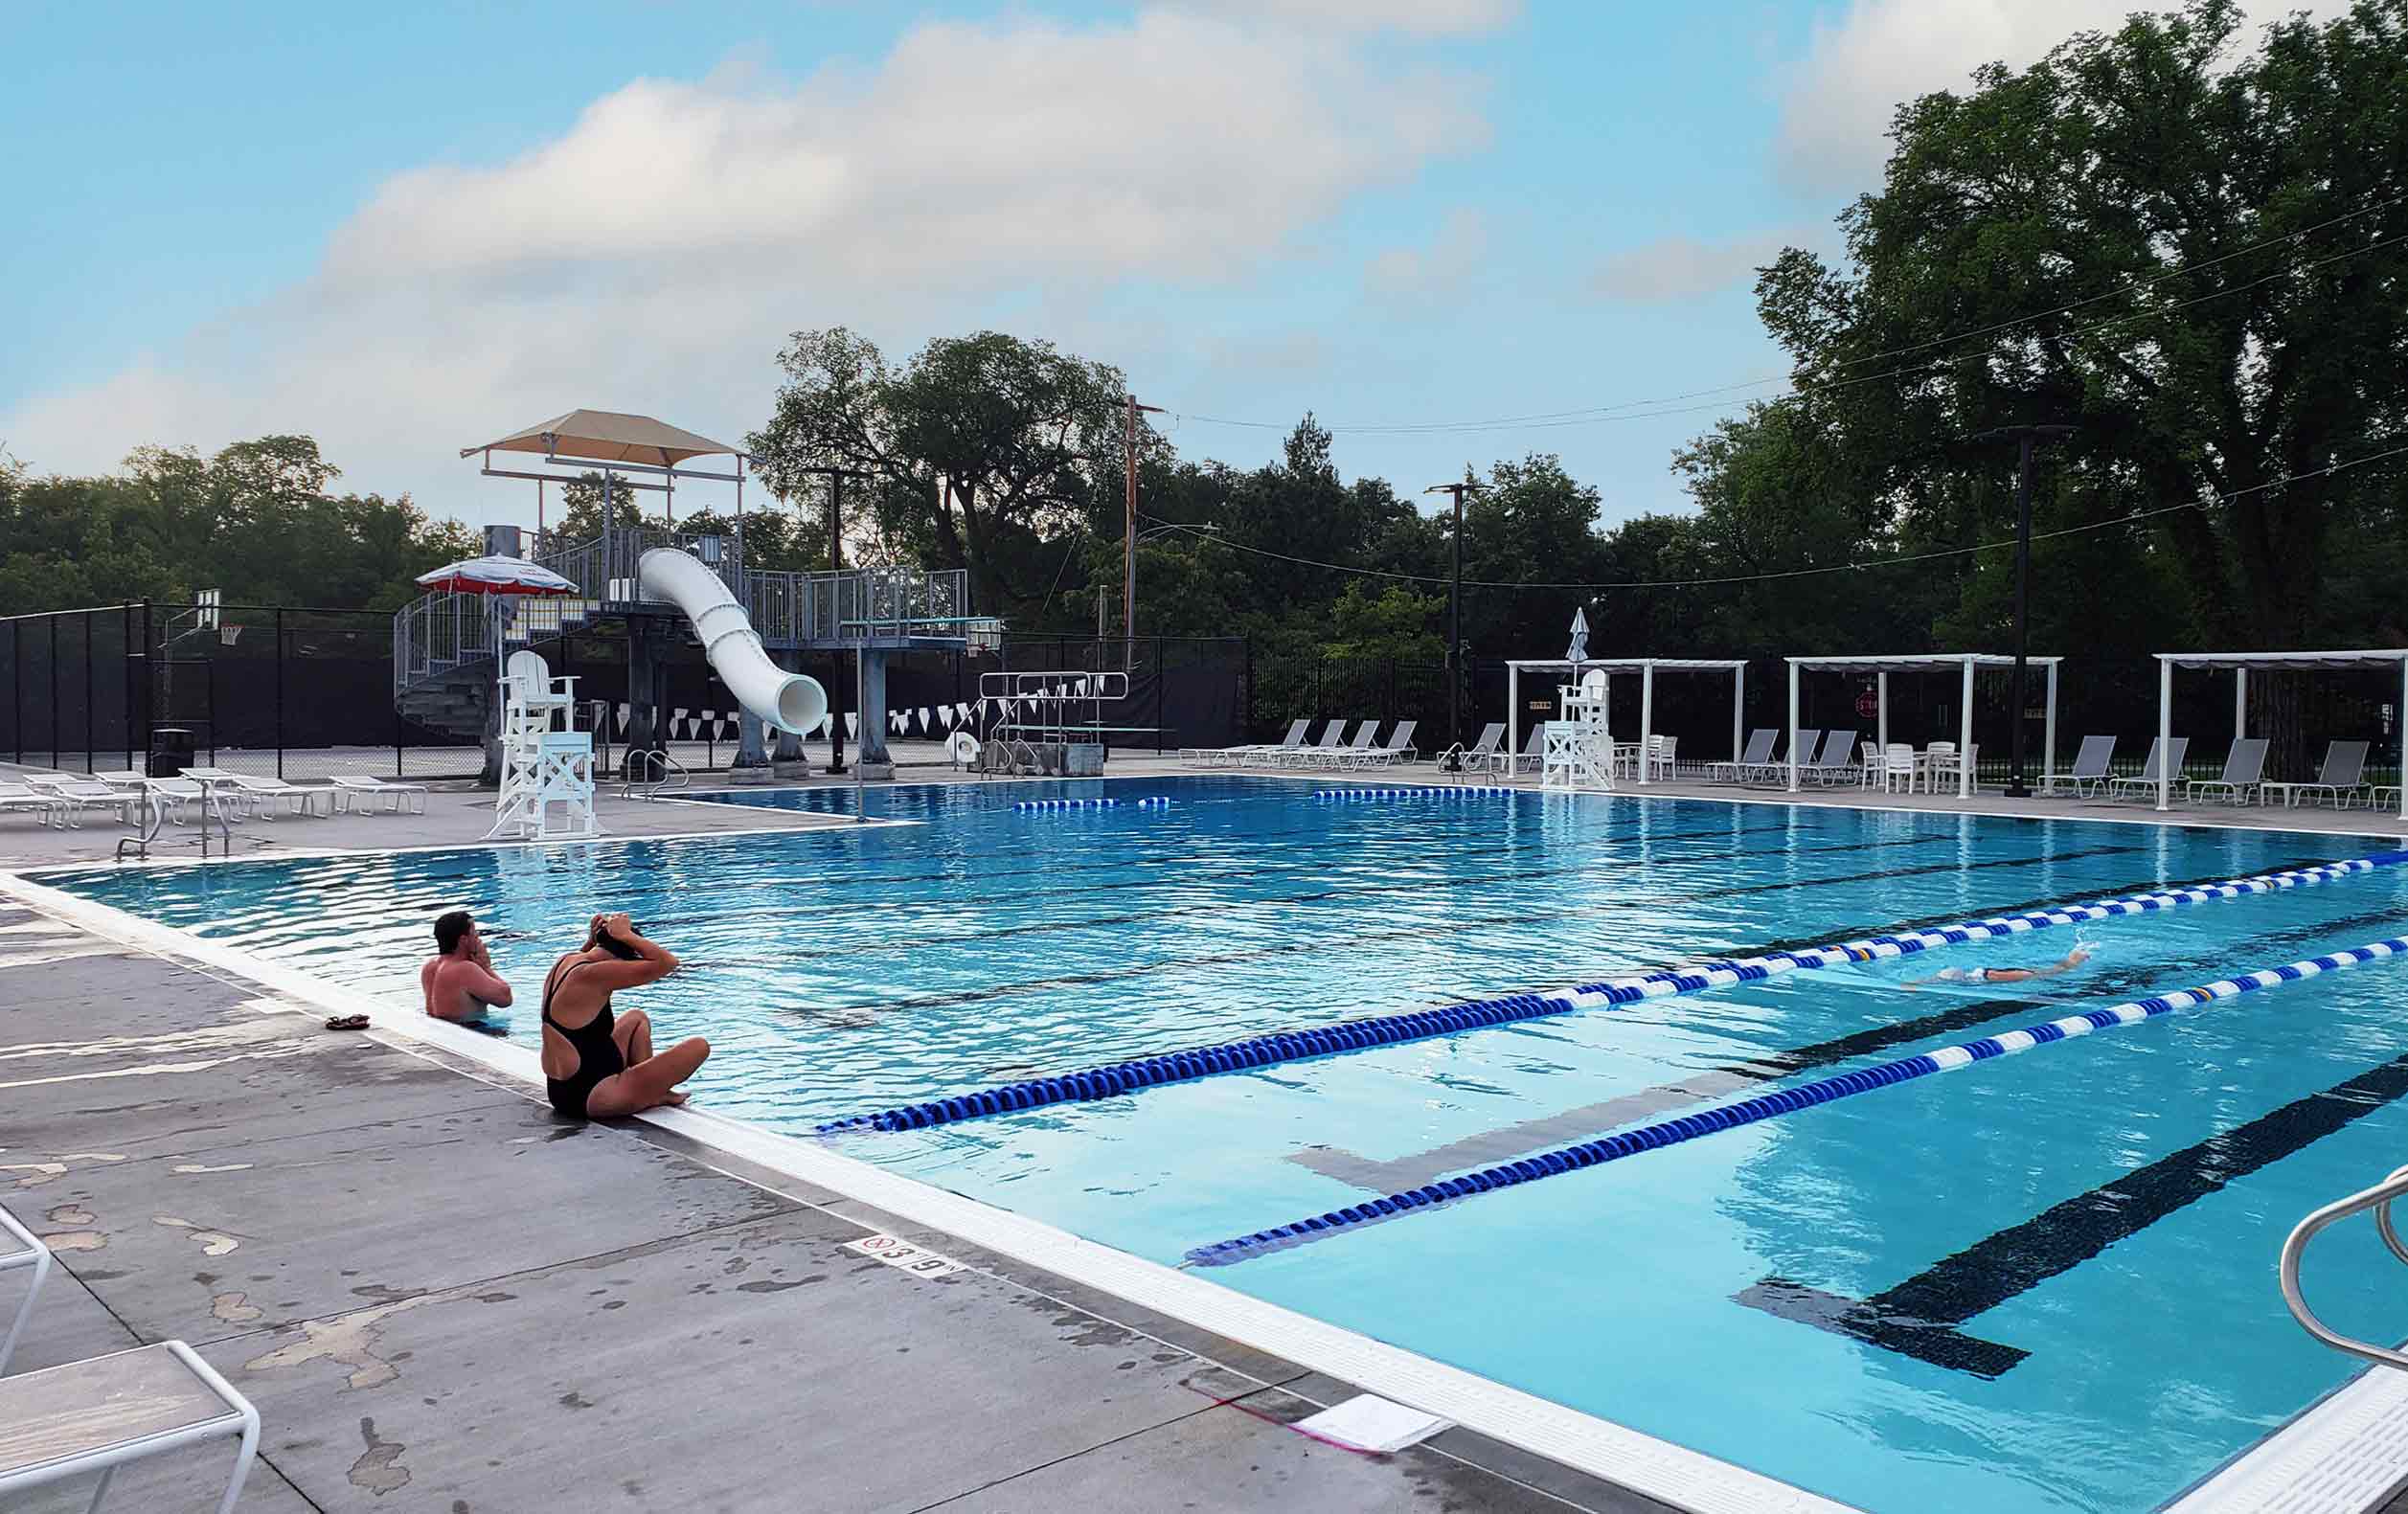 Riverside Swim Club main pool with waterslide and diving boards